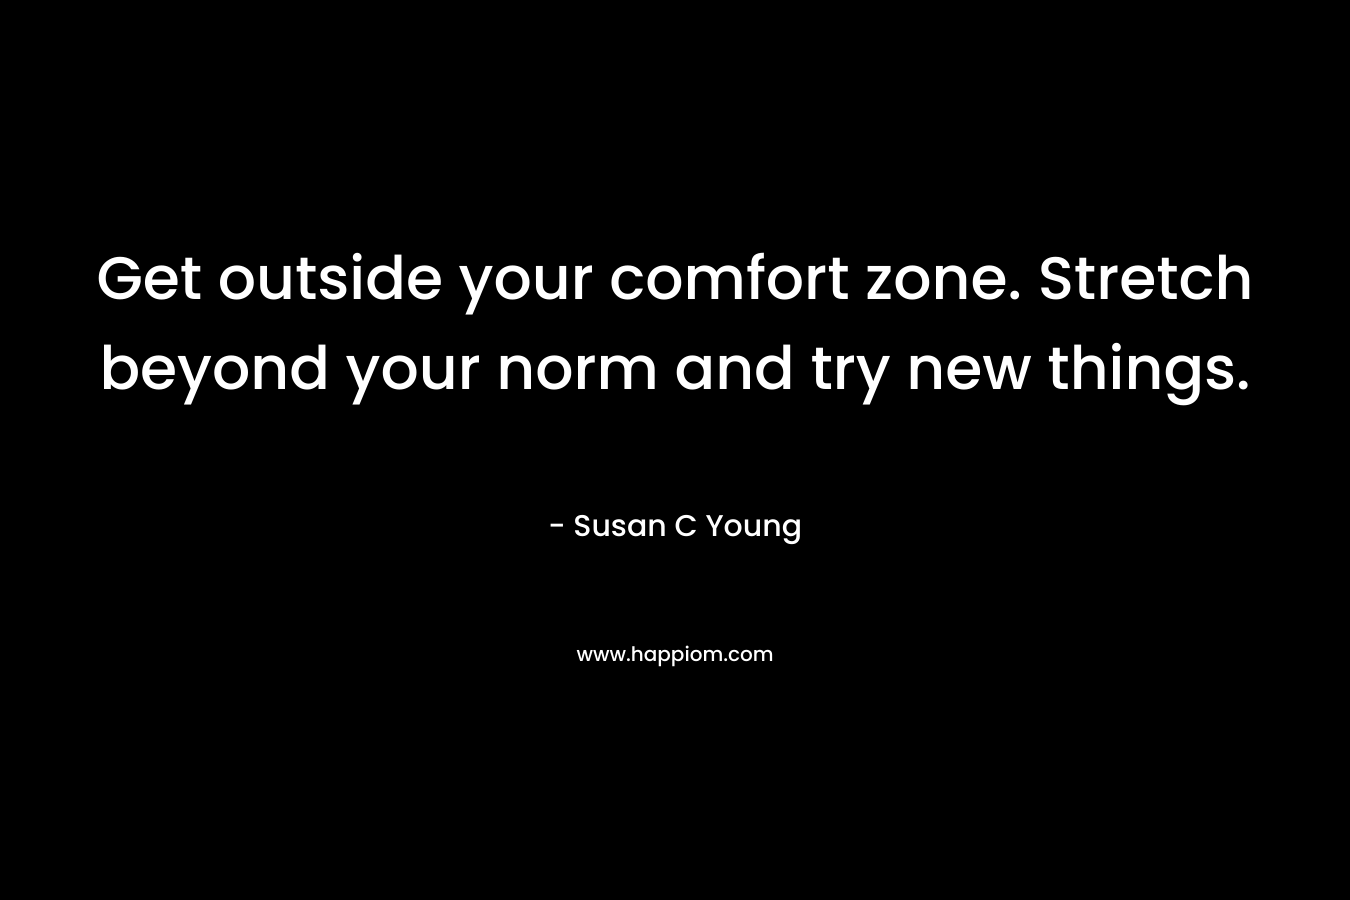 Get outside your comfort zone. Stretch beyond your norm and try new things.